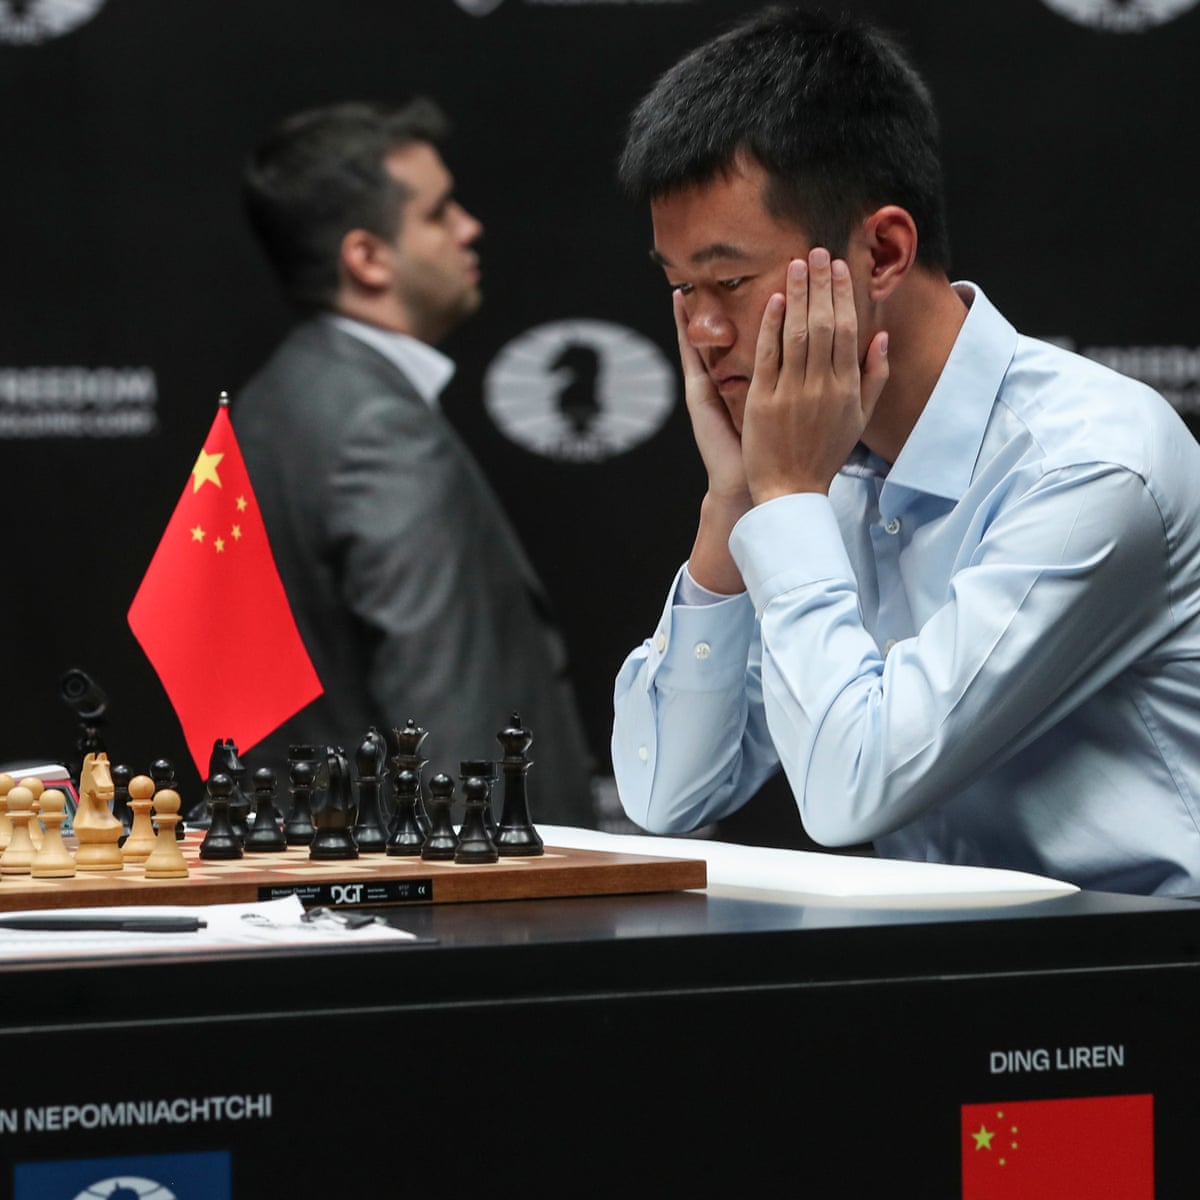 Ding freezes in chess world title battle as Nepomniachtchi regains lead, World Chess Championship 2023